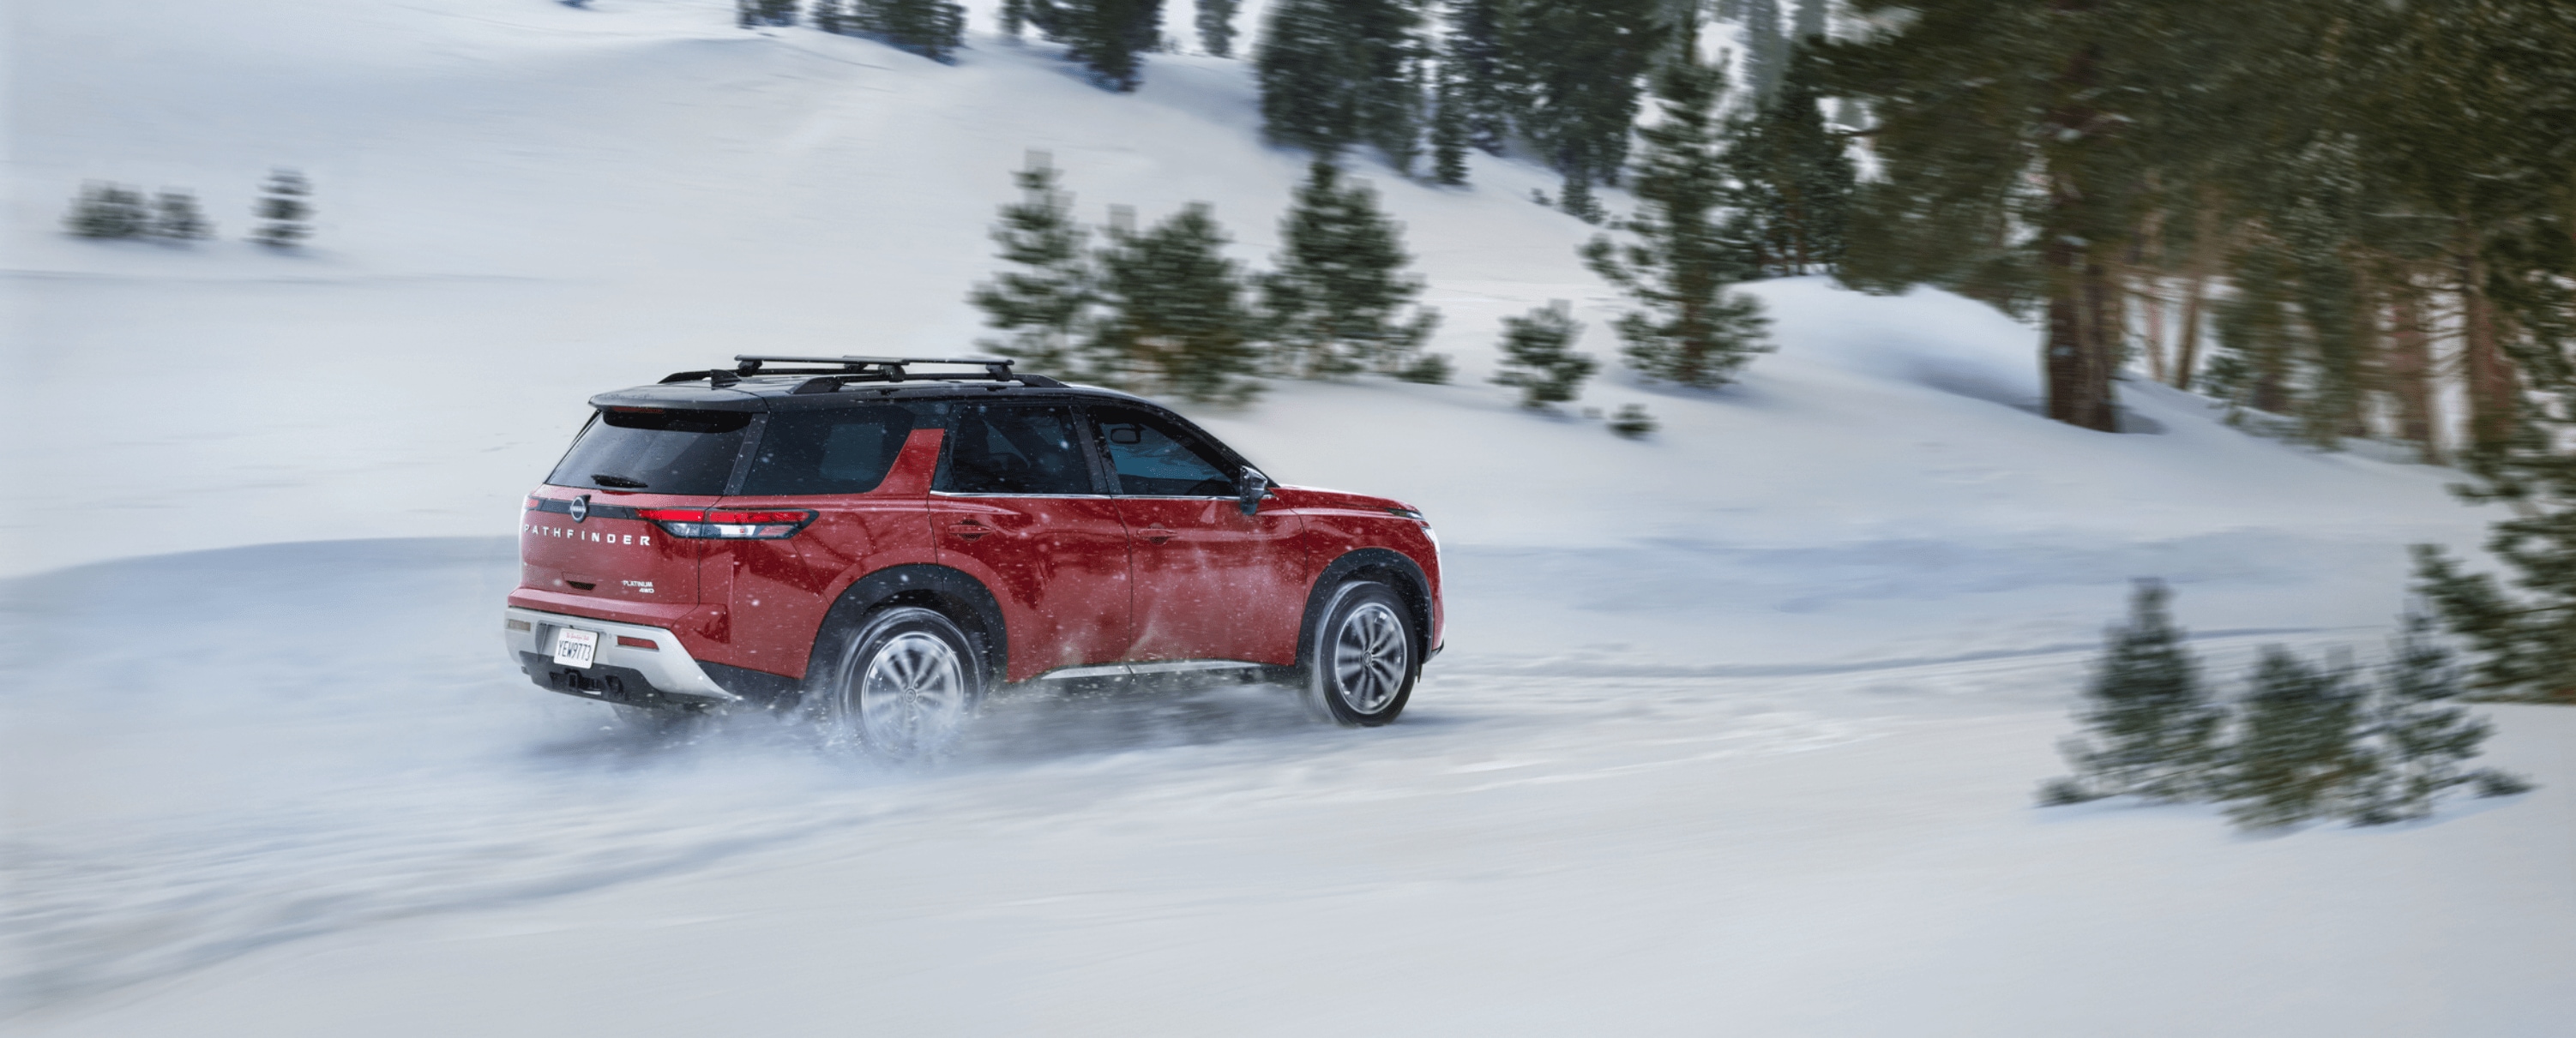 2022 Nissan Pathfinder Driving in Snow